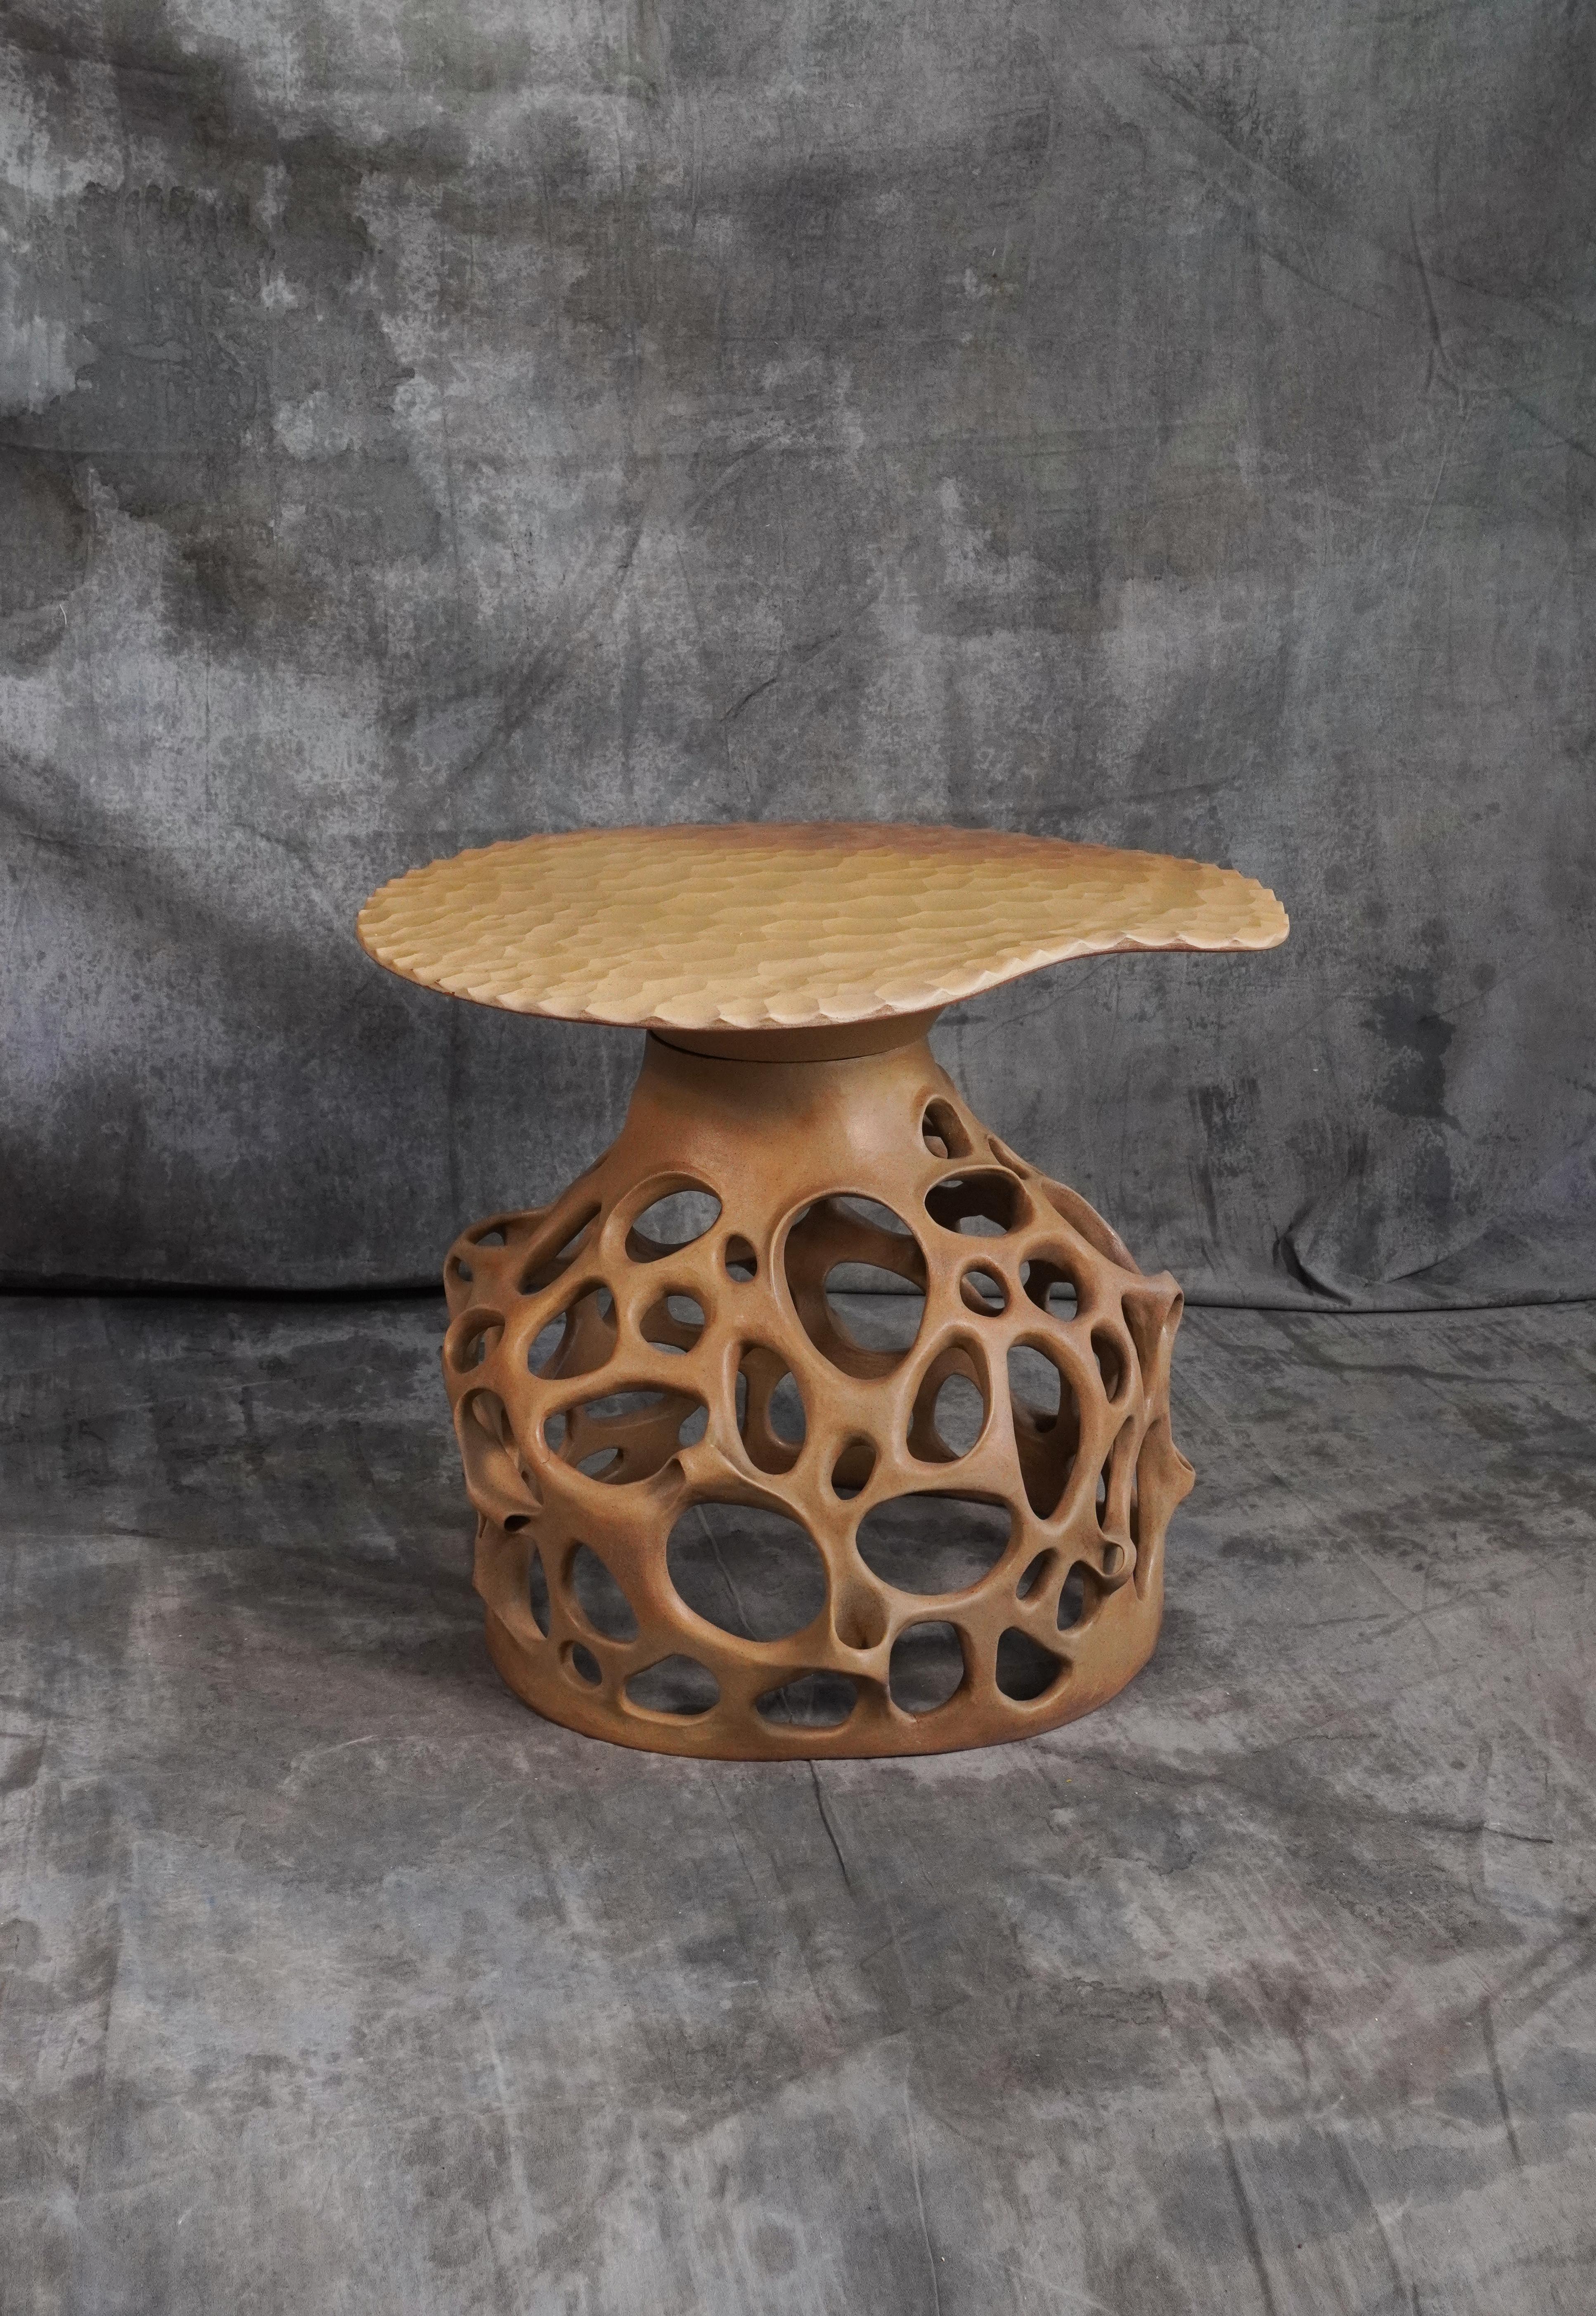 Unique side table Fungi handmade by Jan Ernst
Dimensions: L 40 x H 45 cm
Materials: Terracotta

Other dimensions available
Glazed to client specification.

The Origin Collection is a collaboration between Jan Ernst and Colin Braye. The work